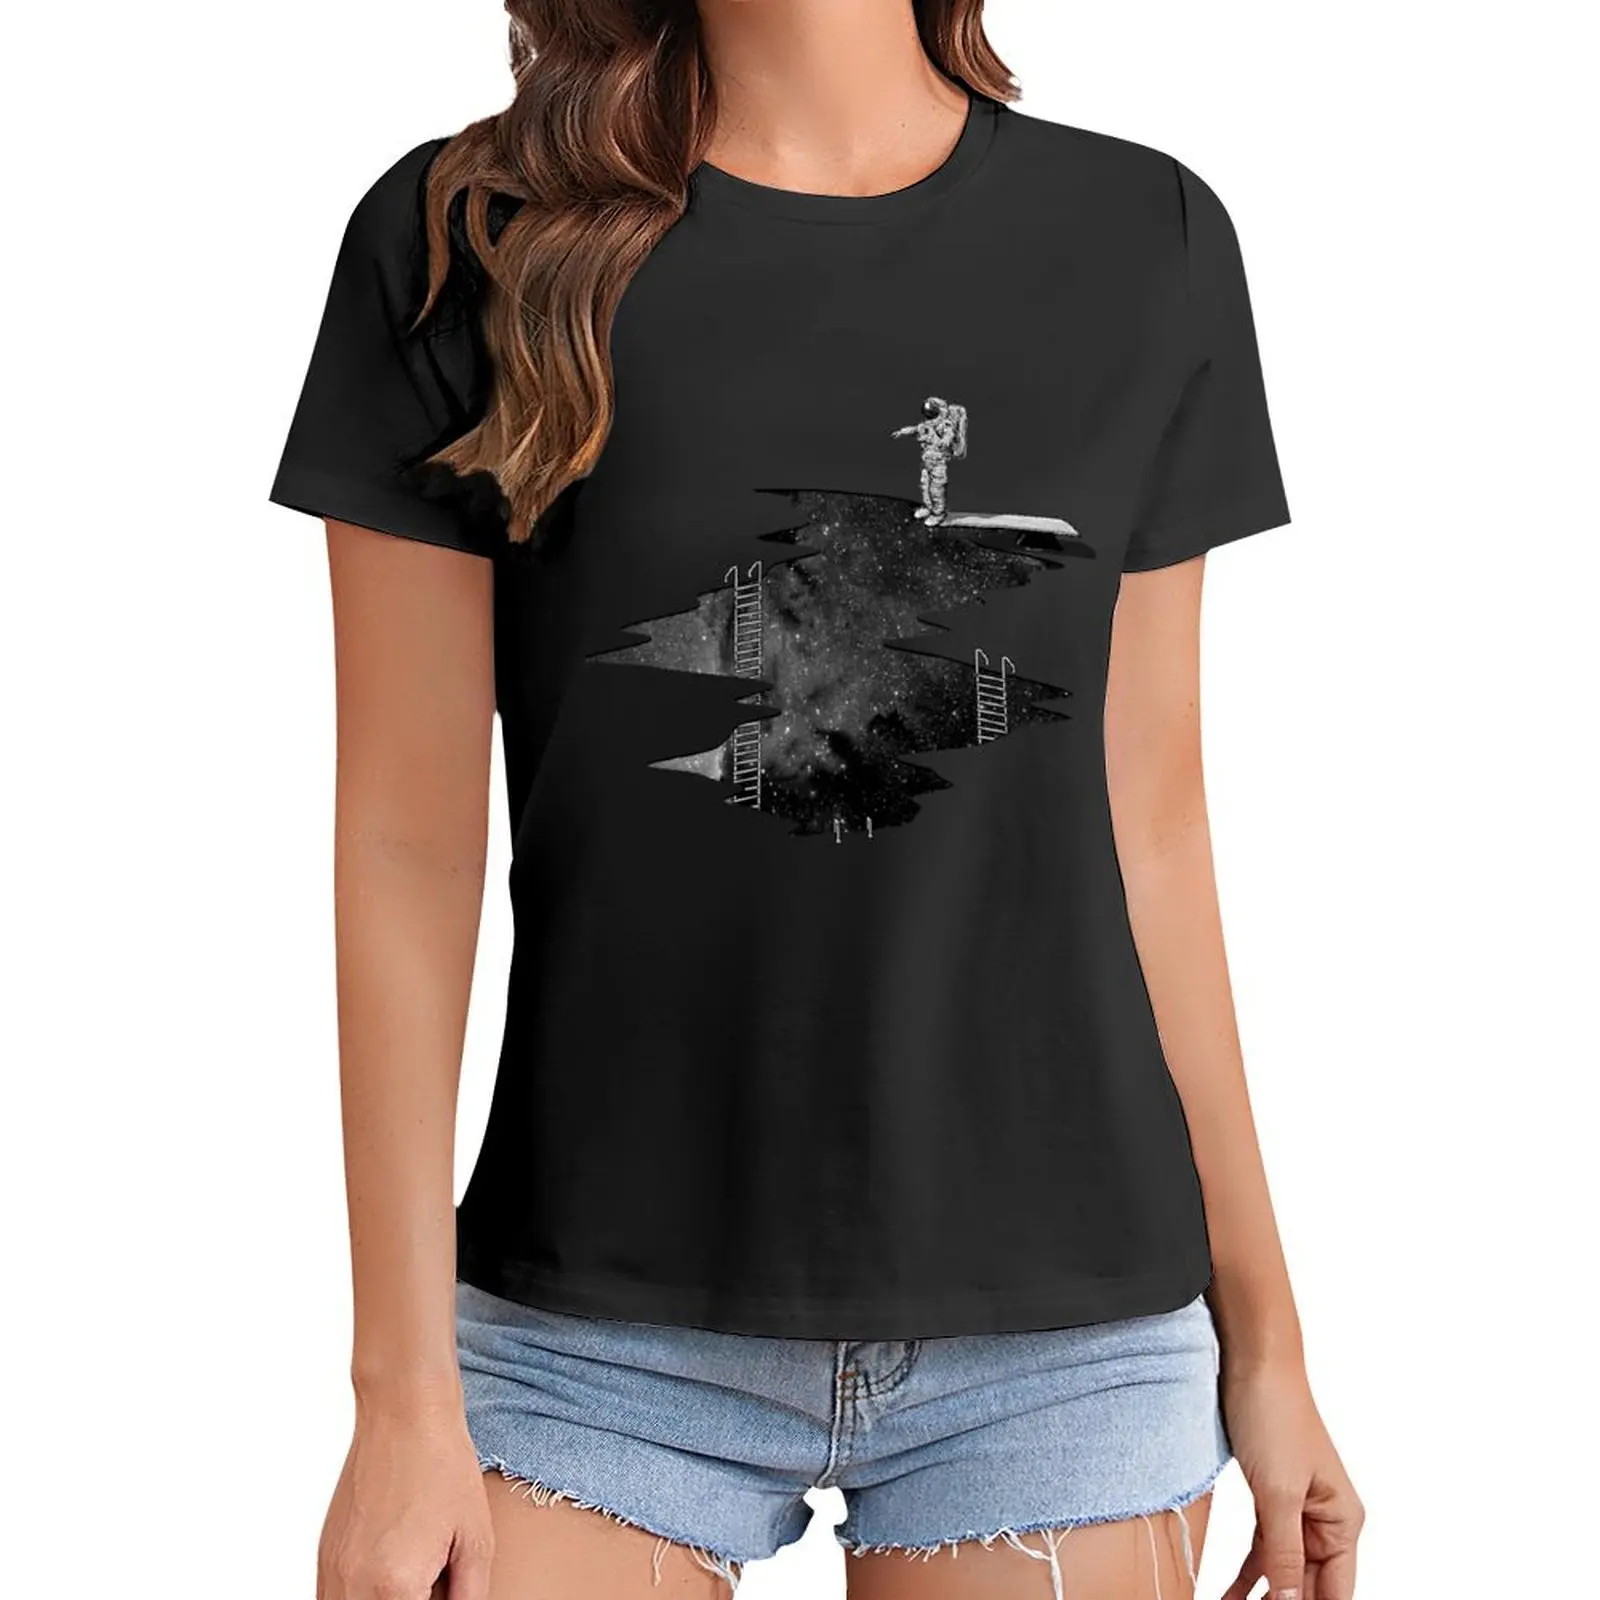 

Space Diving T-Shirt quick drying summer tops vintage Woman clothing